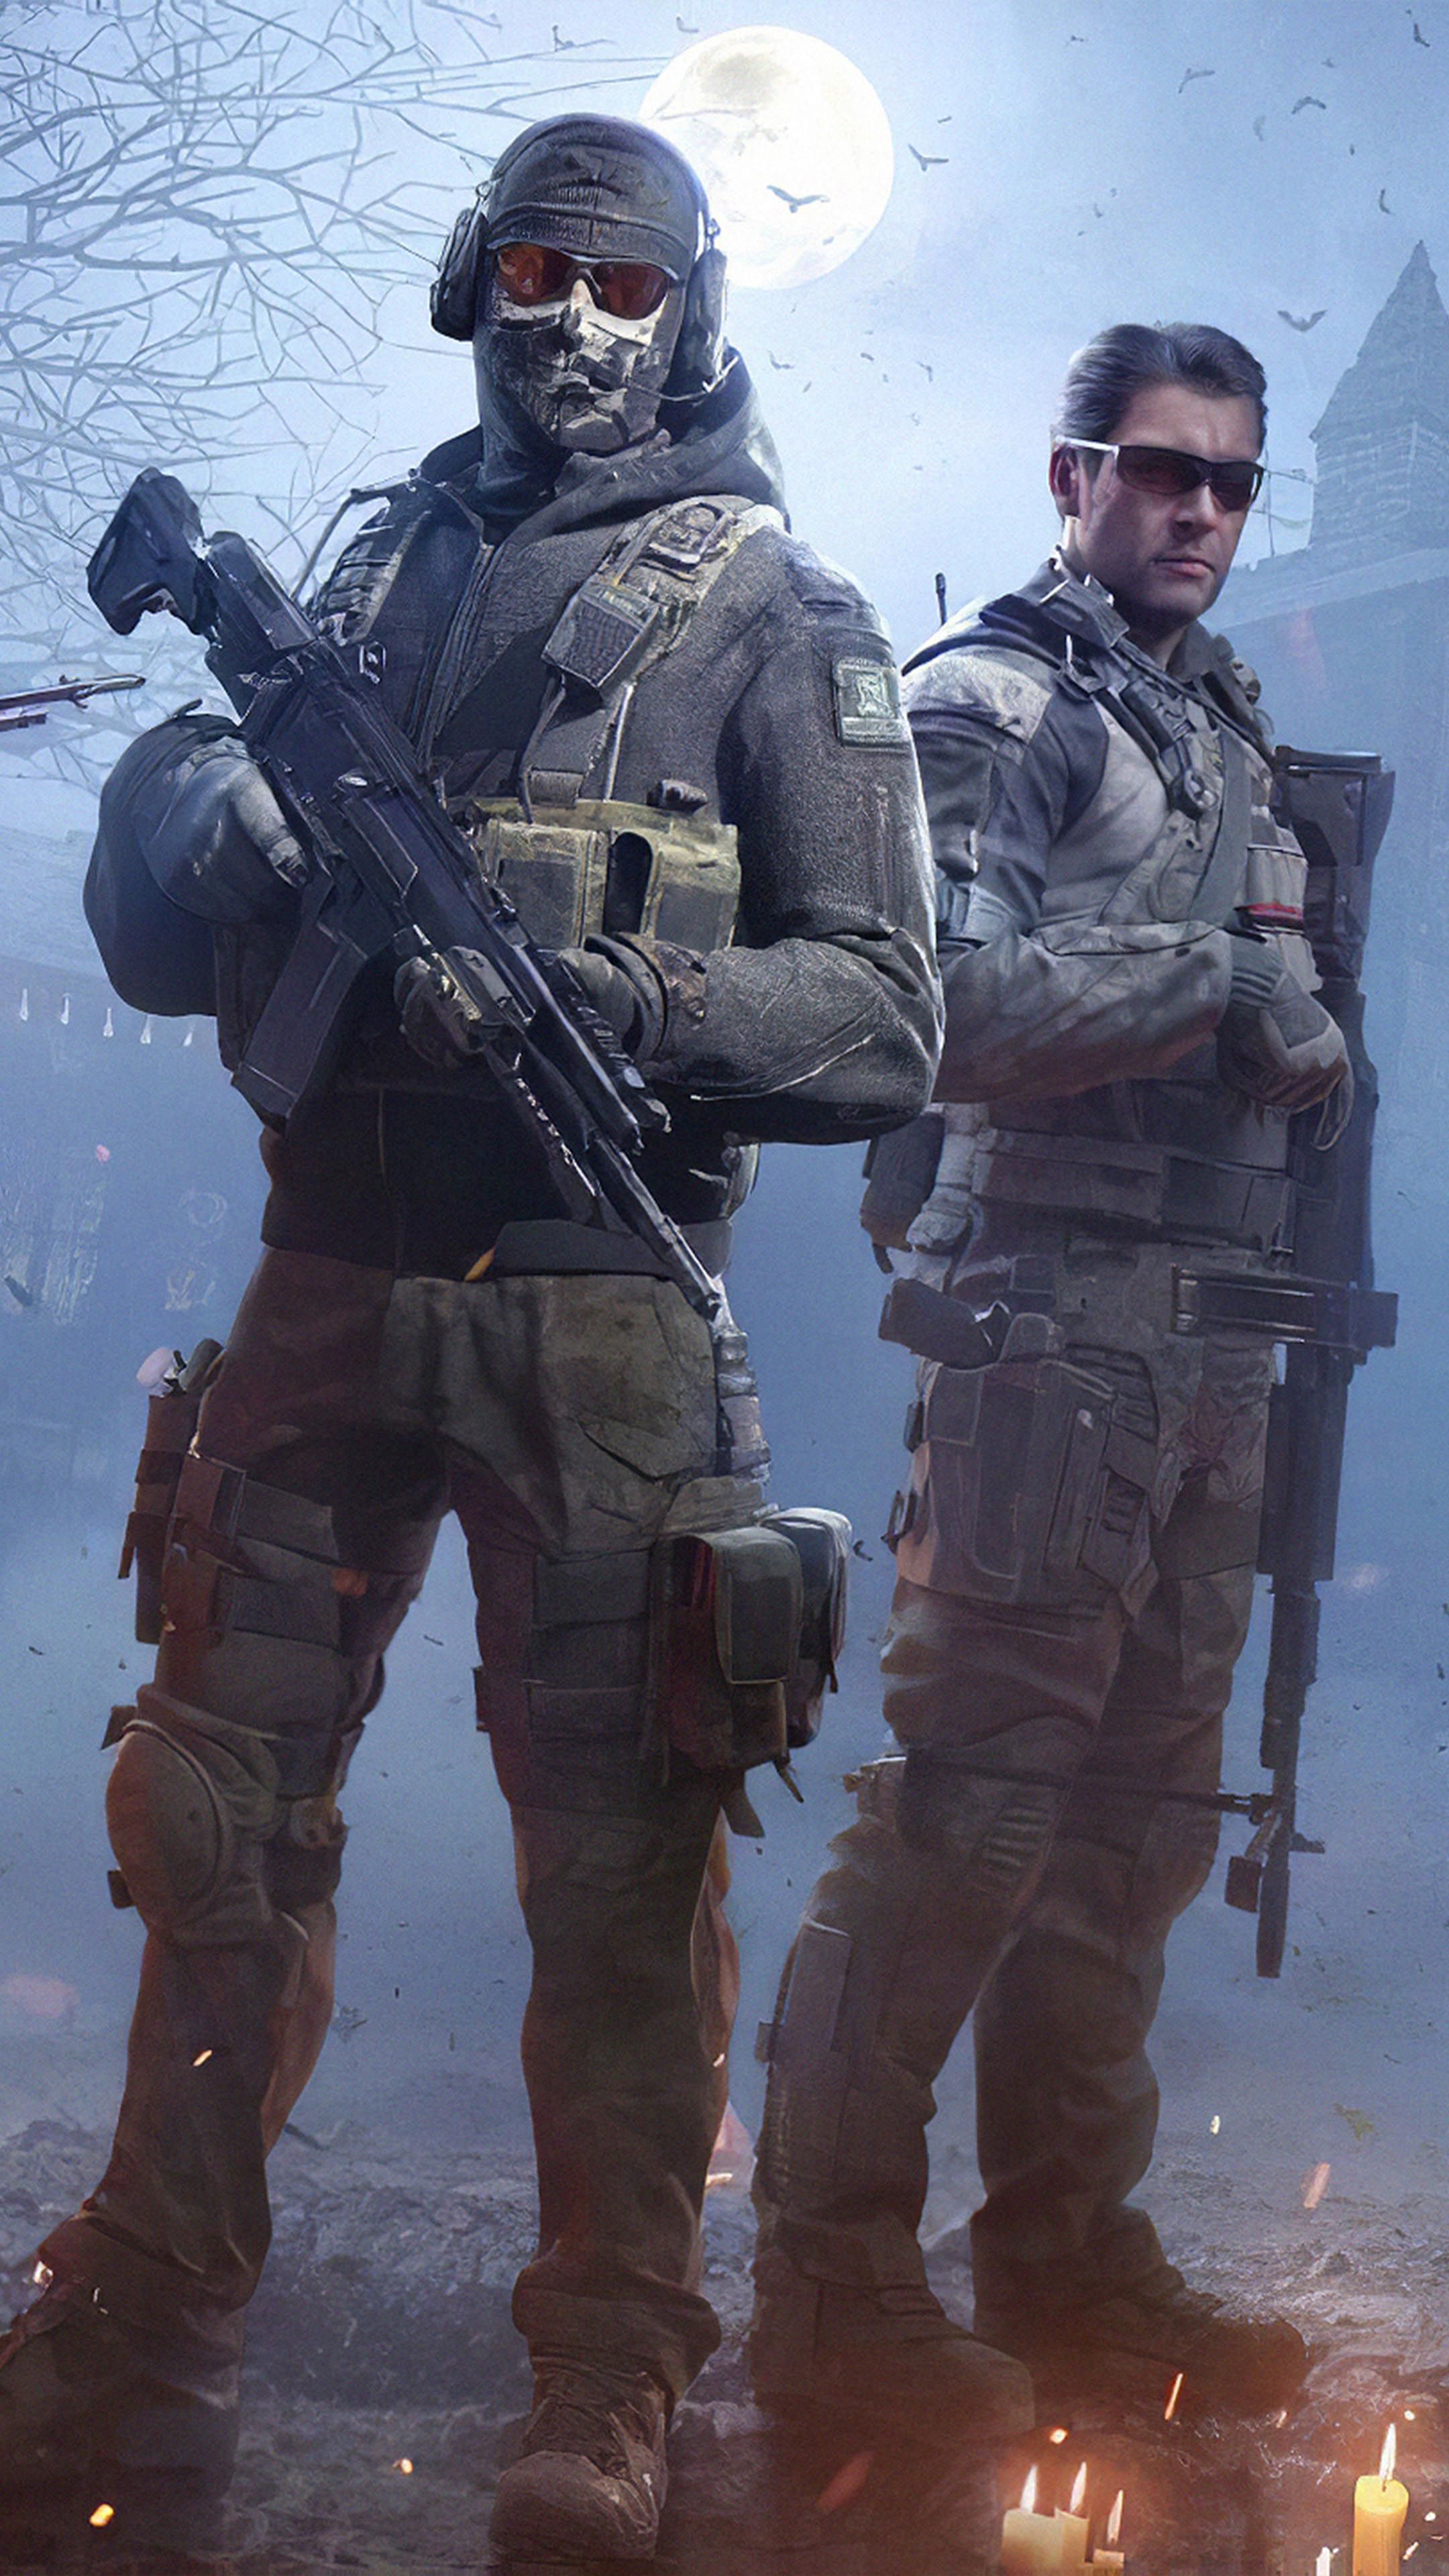 Squad Call of Duty Mobile 4K Ultra HD Mobile Wallpaper. Call of duty zombies, Call of duty ghosts, Call of duty black